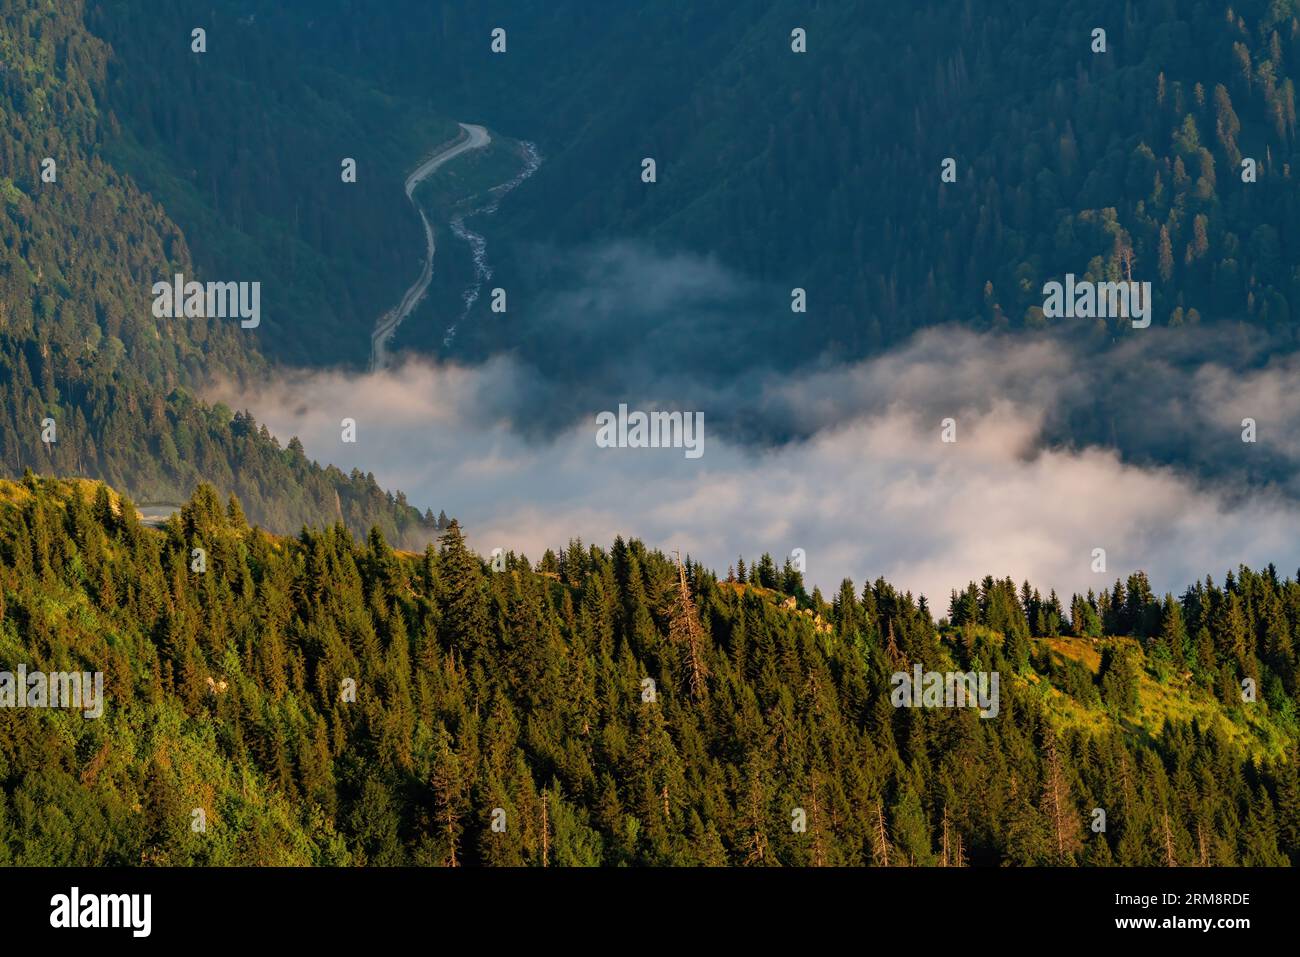 The mist is composed of evergreen green silhouettes on a forested mountainside in a low valley. In the background is a dirt road and a parallel stream Stock Photo